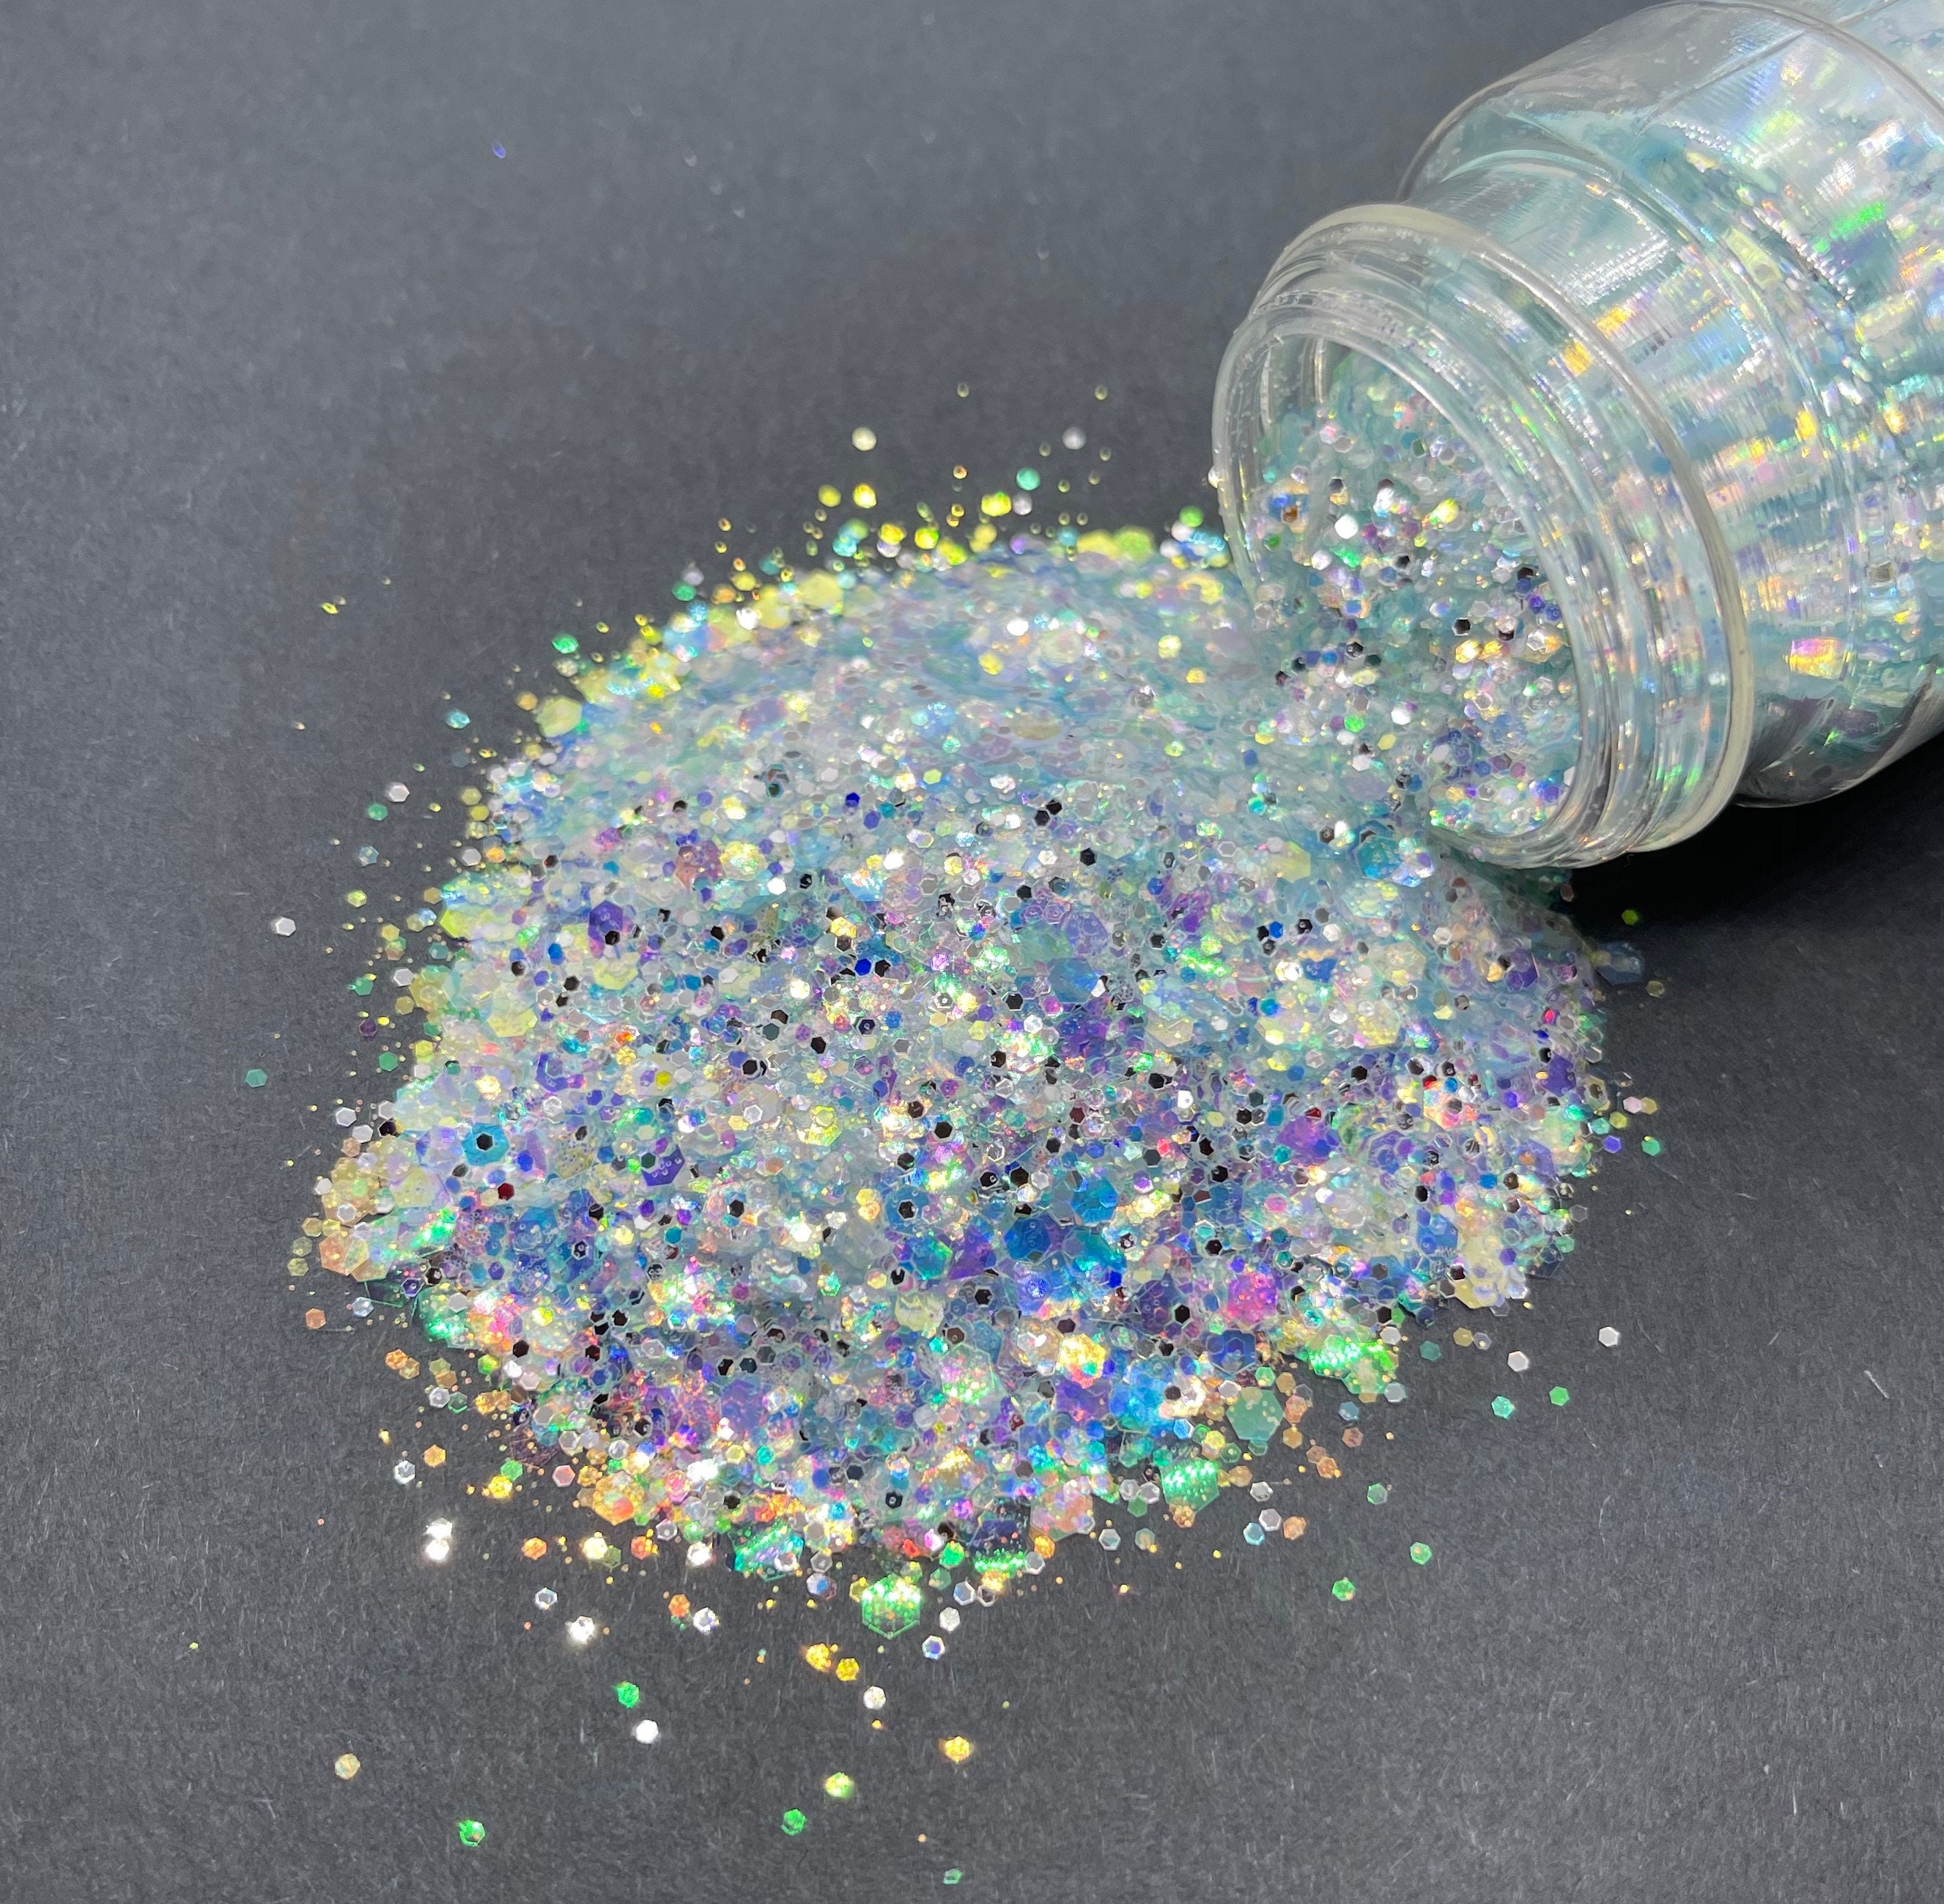 Glitter - 1 LB Crystal Clear Fine Glitter Shaker, Glitter for Resin,  Glitter for Crafts, Fine Glitter for Scrapbooking and Art and Craft  Supplies